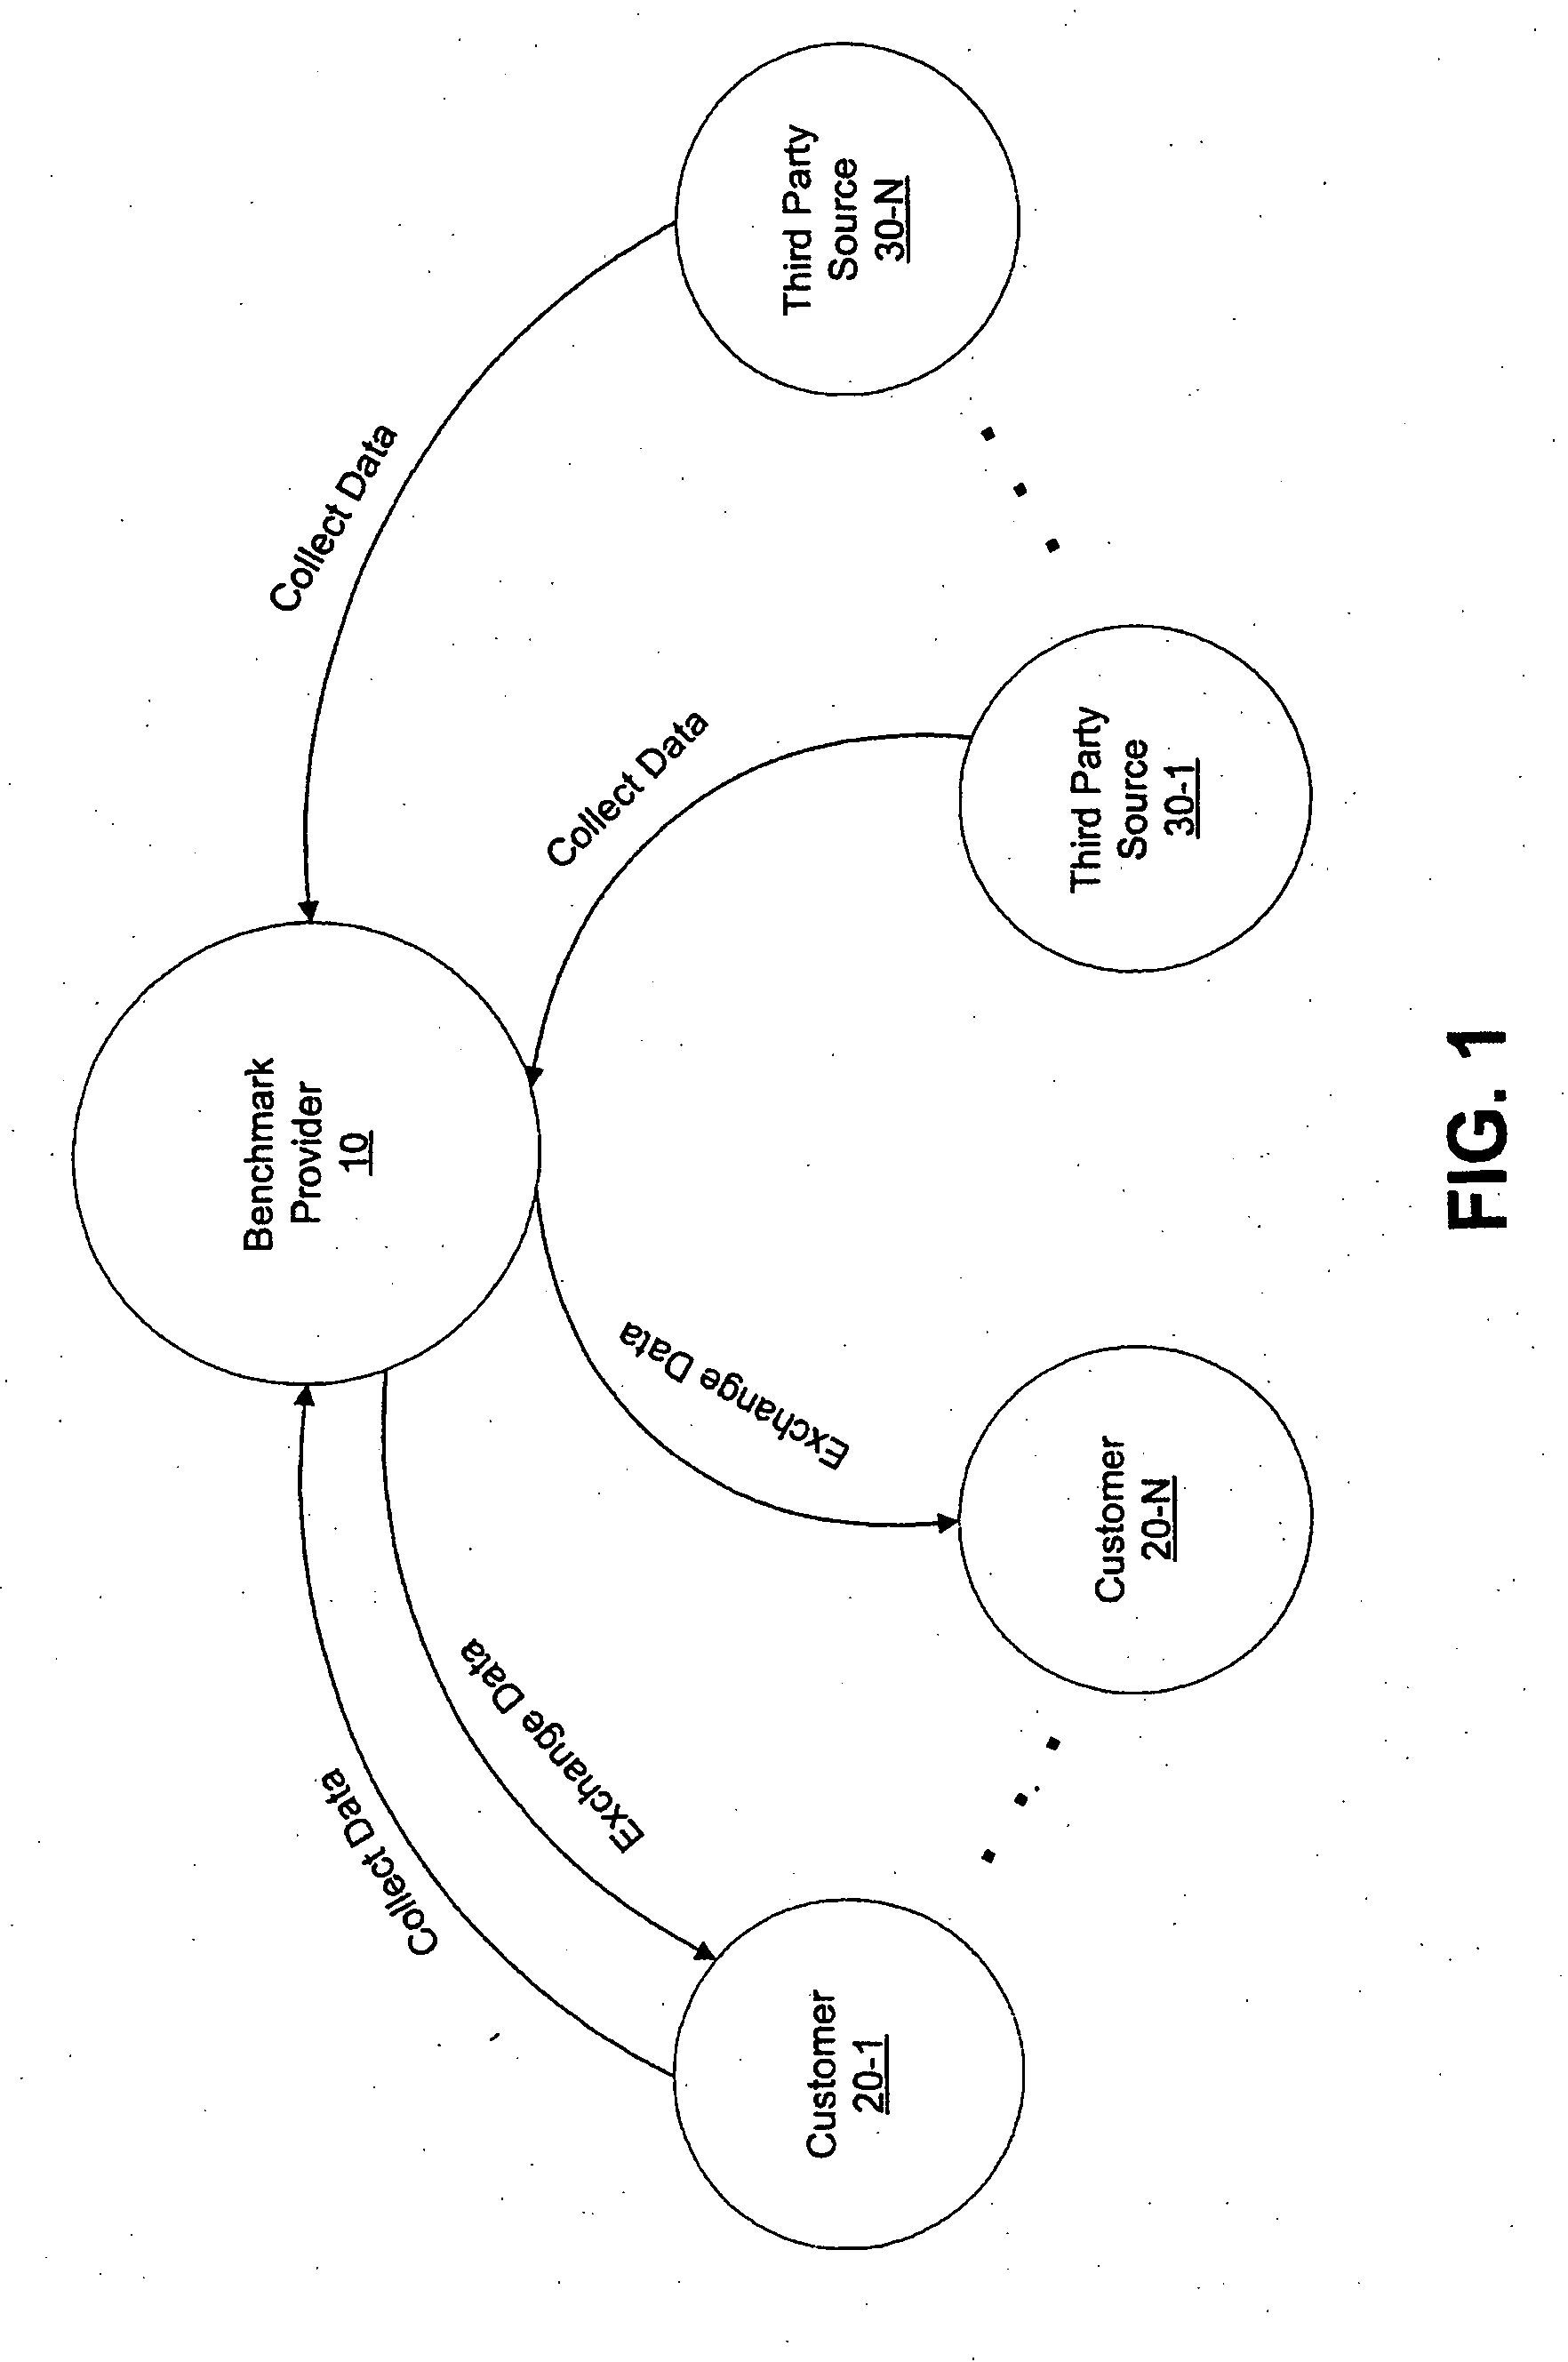 Systems and methods for providing benchmark services to customers